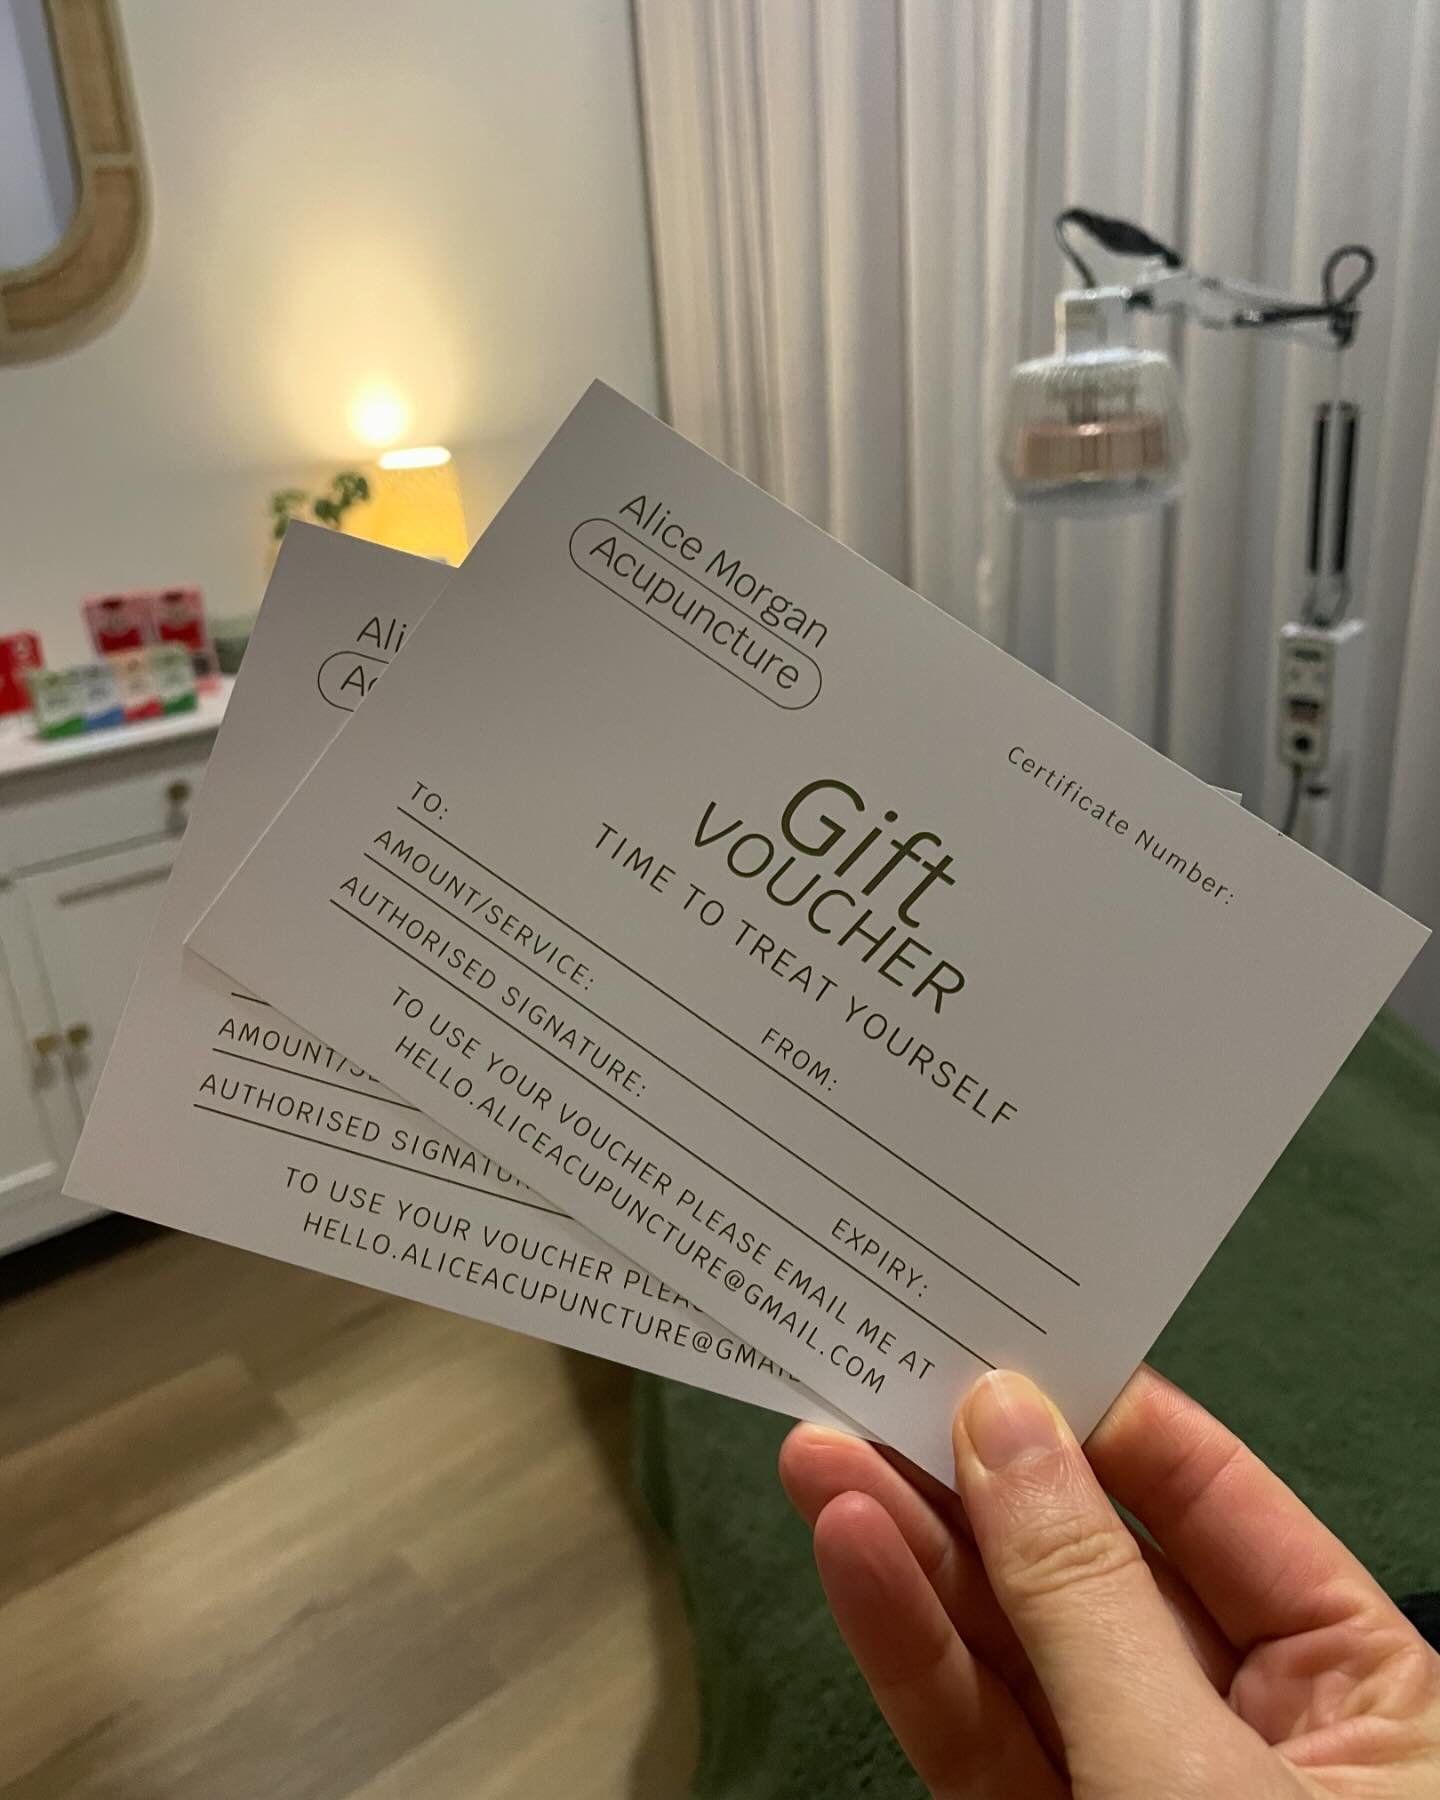 ⭐️ Gift Vouchers! ⭐️

When you don&rsquo;t know what to get that person who has everything! 

I got these cute little vouchers printed off so if you&rsquo;d like to buy one in person, let me know!

Otherwise you can grab an online voucher - follow th